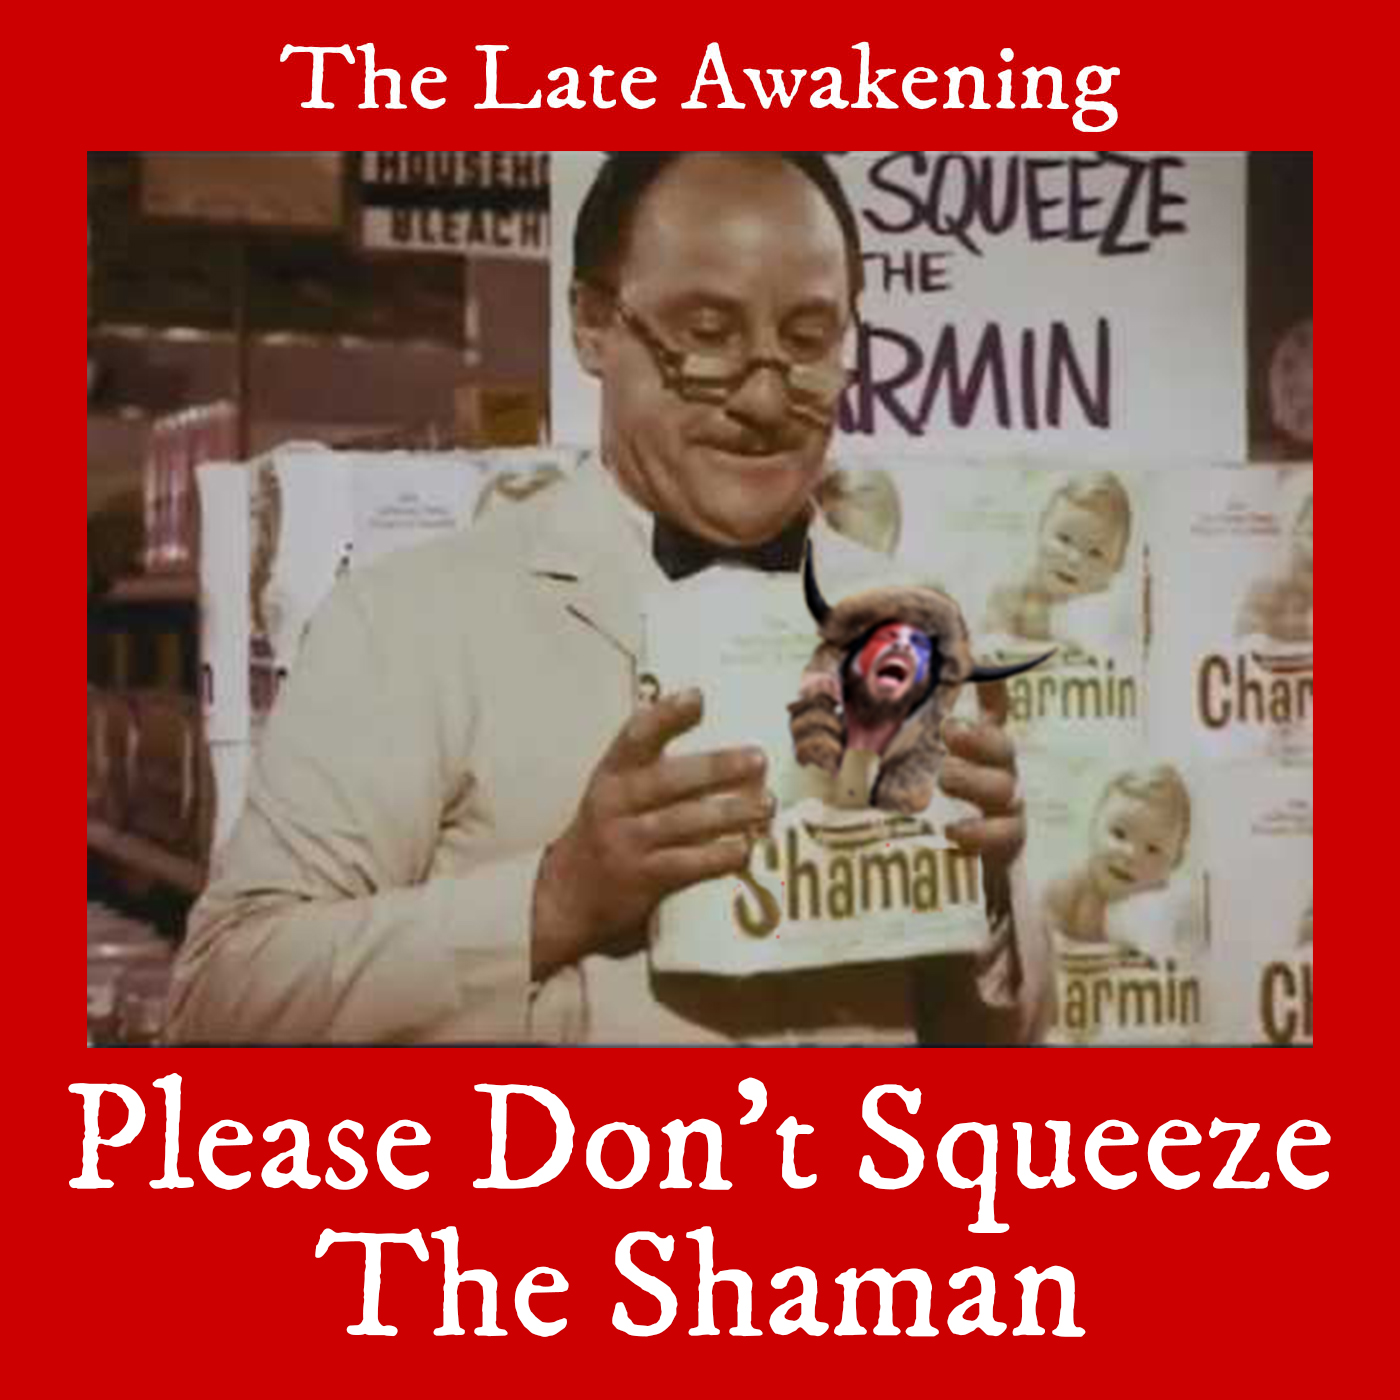 Please Don't Squeeze the Shaman